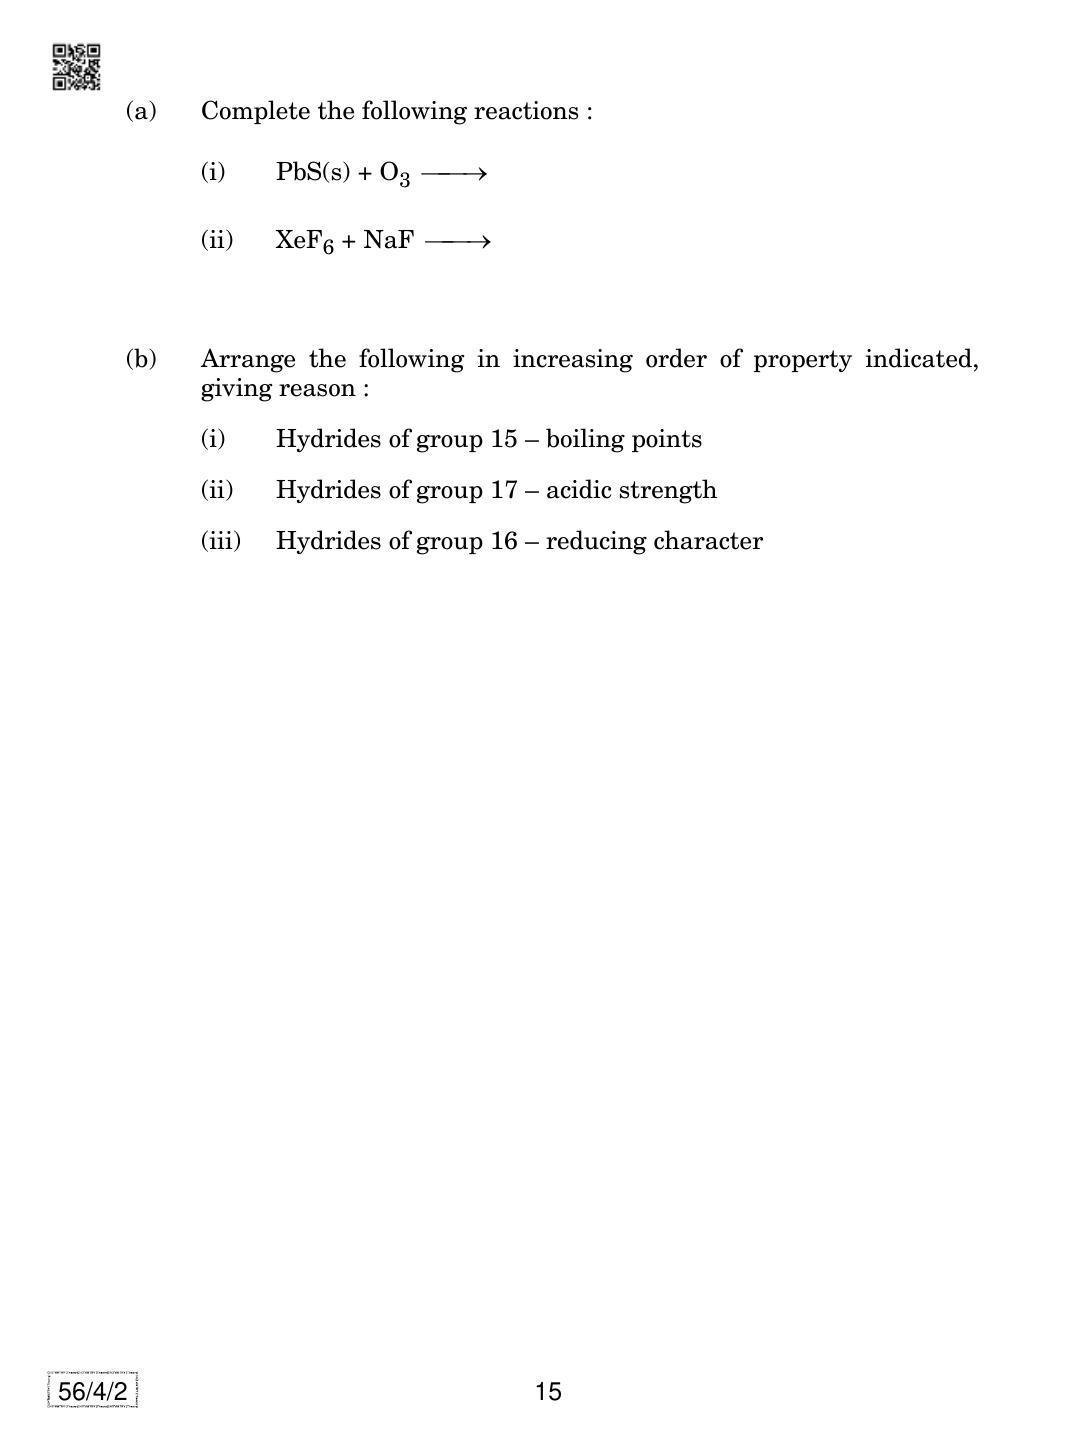 CBSE Class 12 56-4-2 Chemistry 2019 Question Paper - Page 15